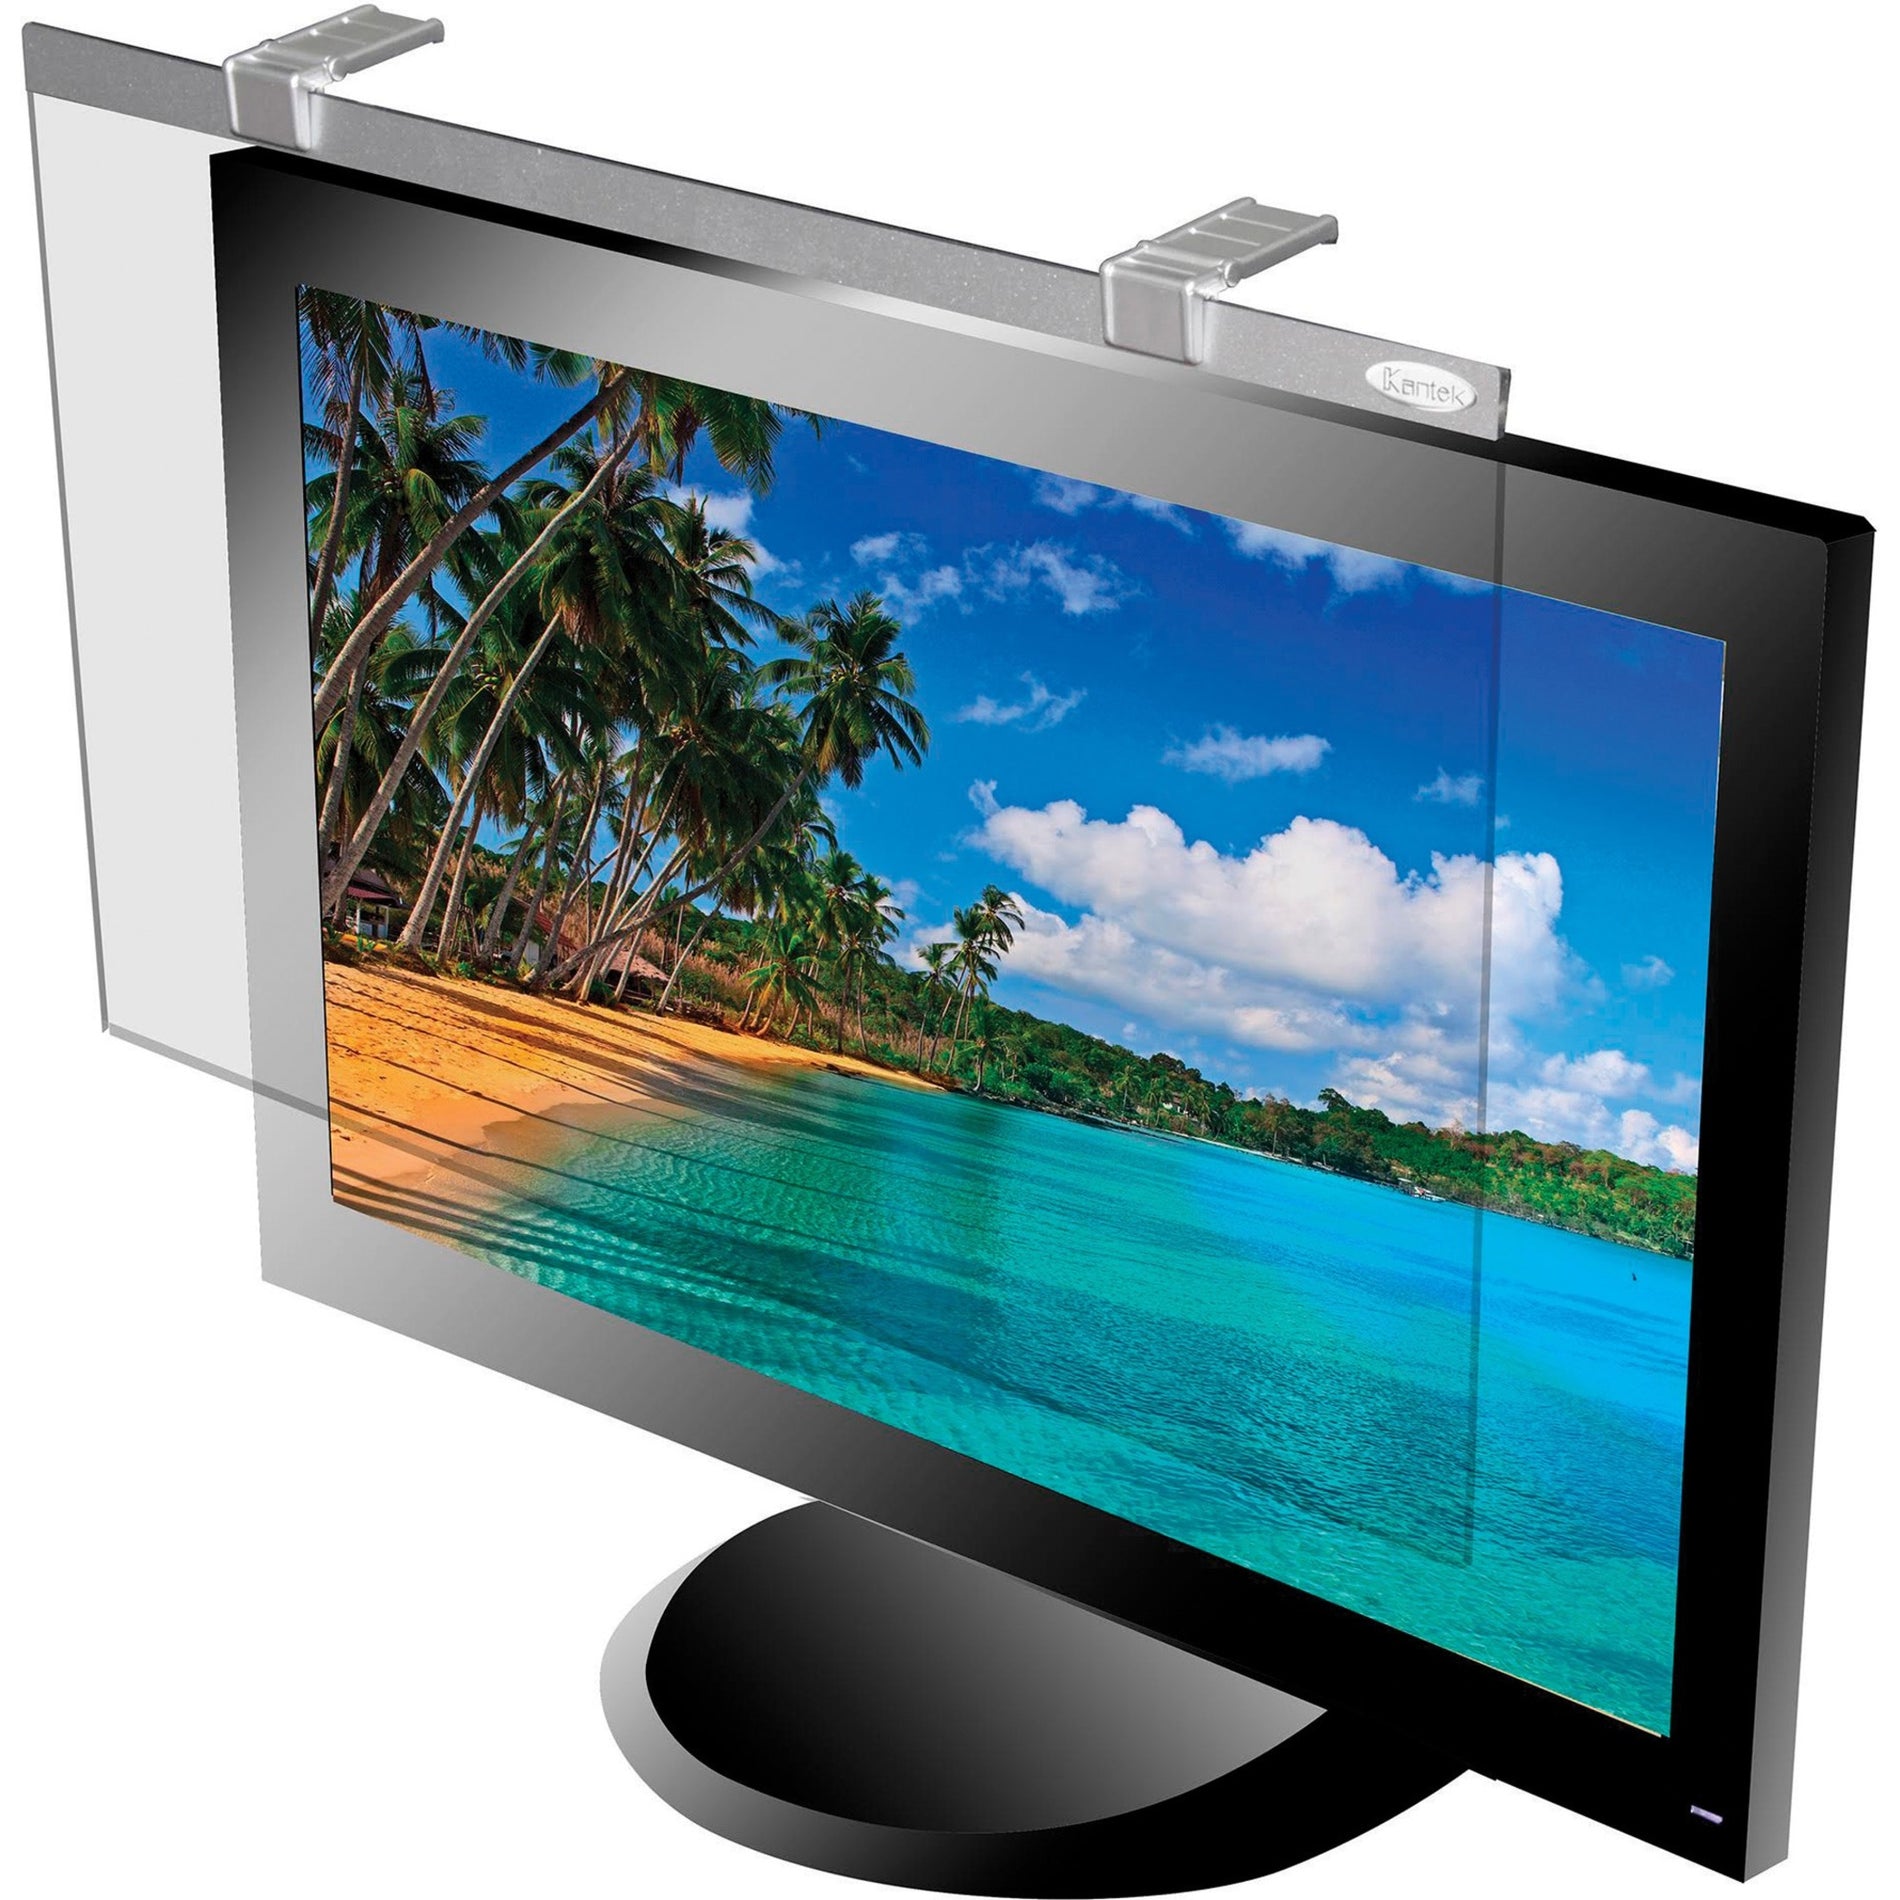 Kantek LCD17 LCD Protective Filter, Anti-glare, Scratch Resistant, Silver